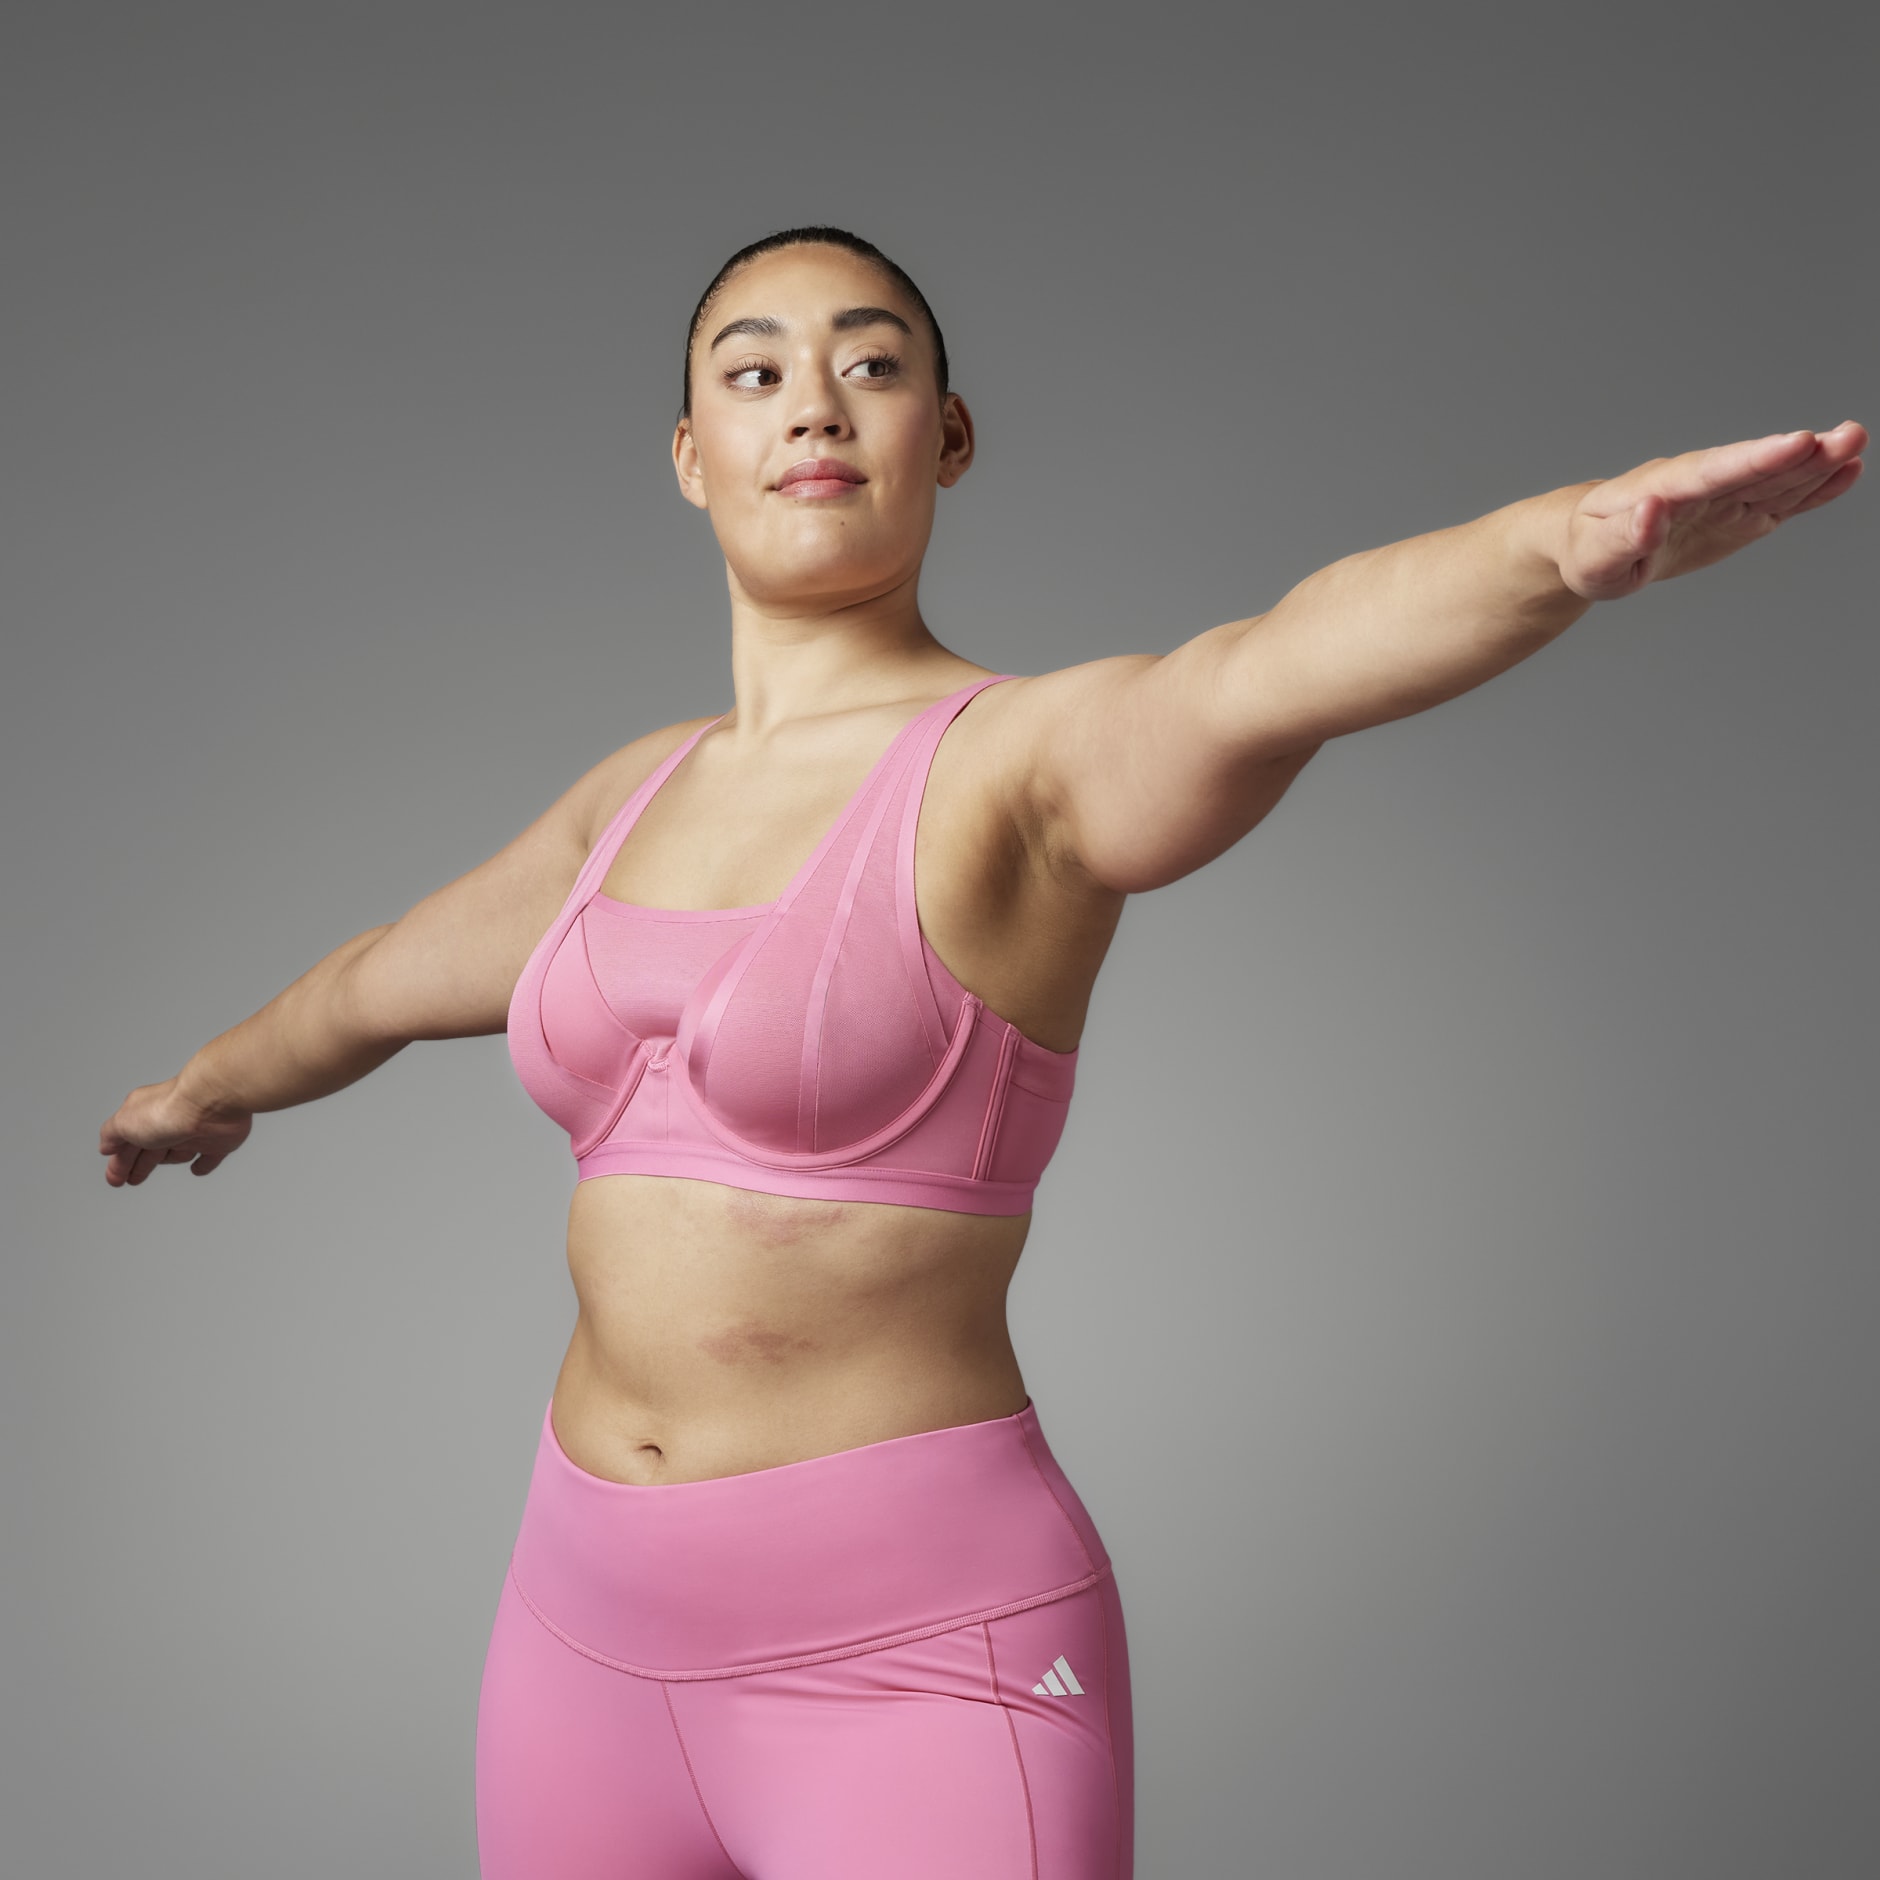 Xersion, Intimates & Sleepwear, Xersion Pink High Support Sports Bra With  Frontal Zipper